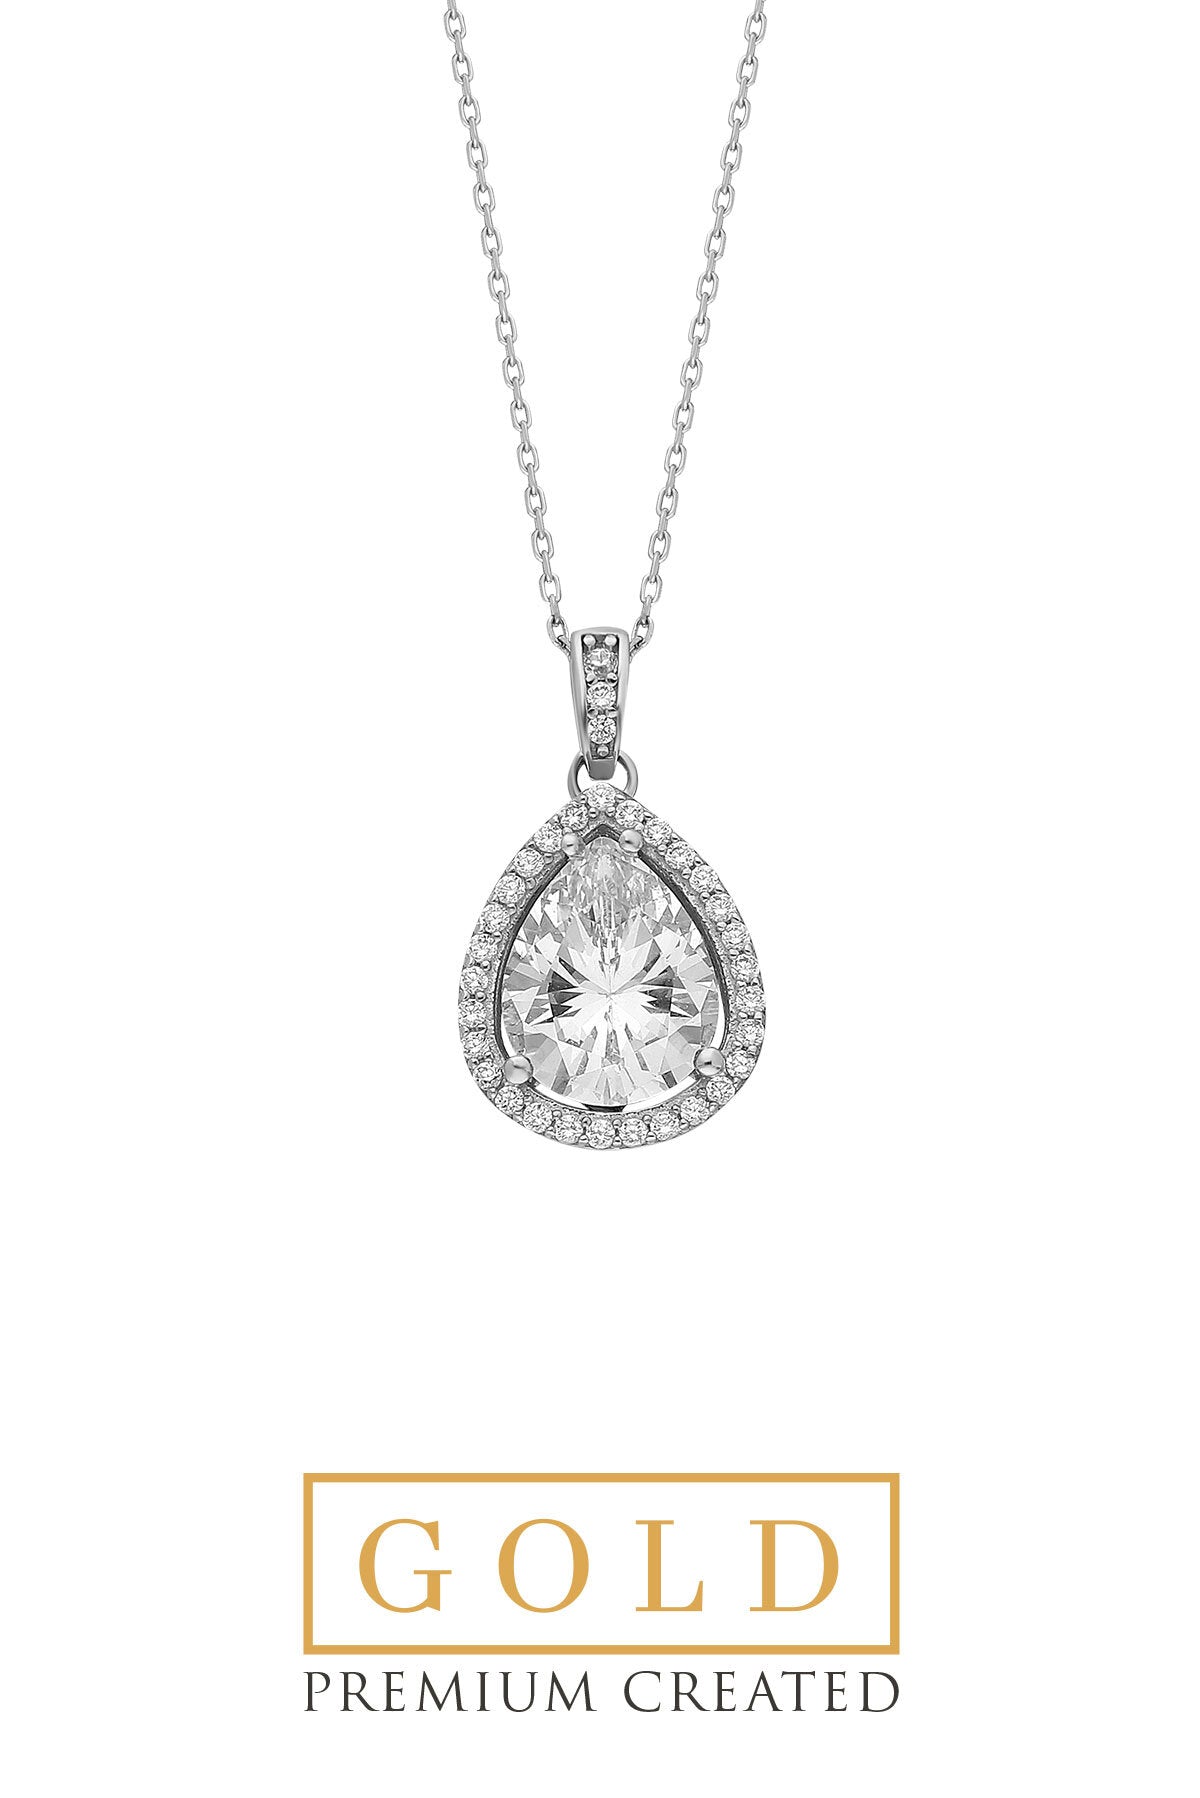 14 K White Gold Certified Gold Premium Created Stone Drop Solitaire Necklace